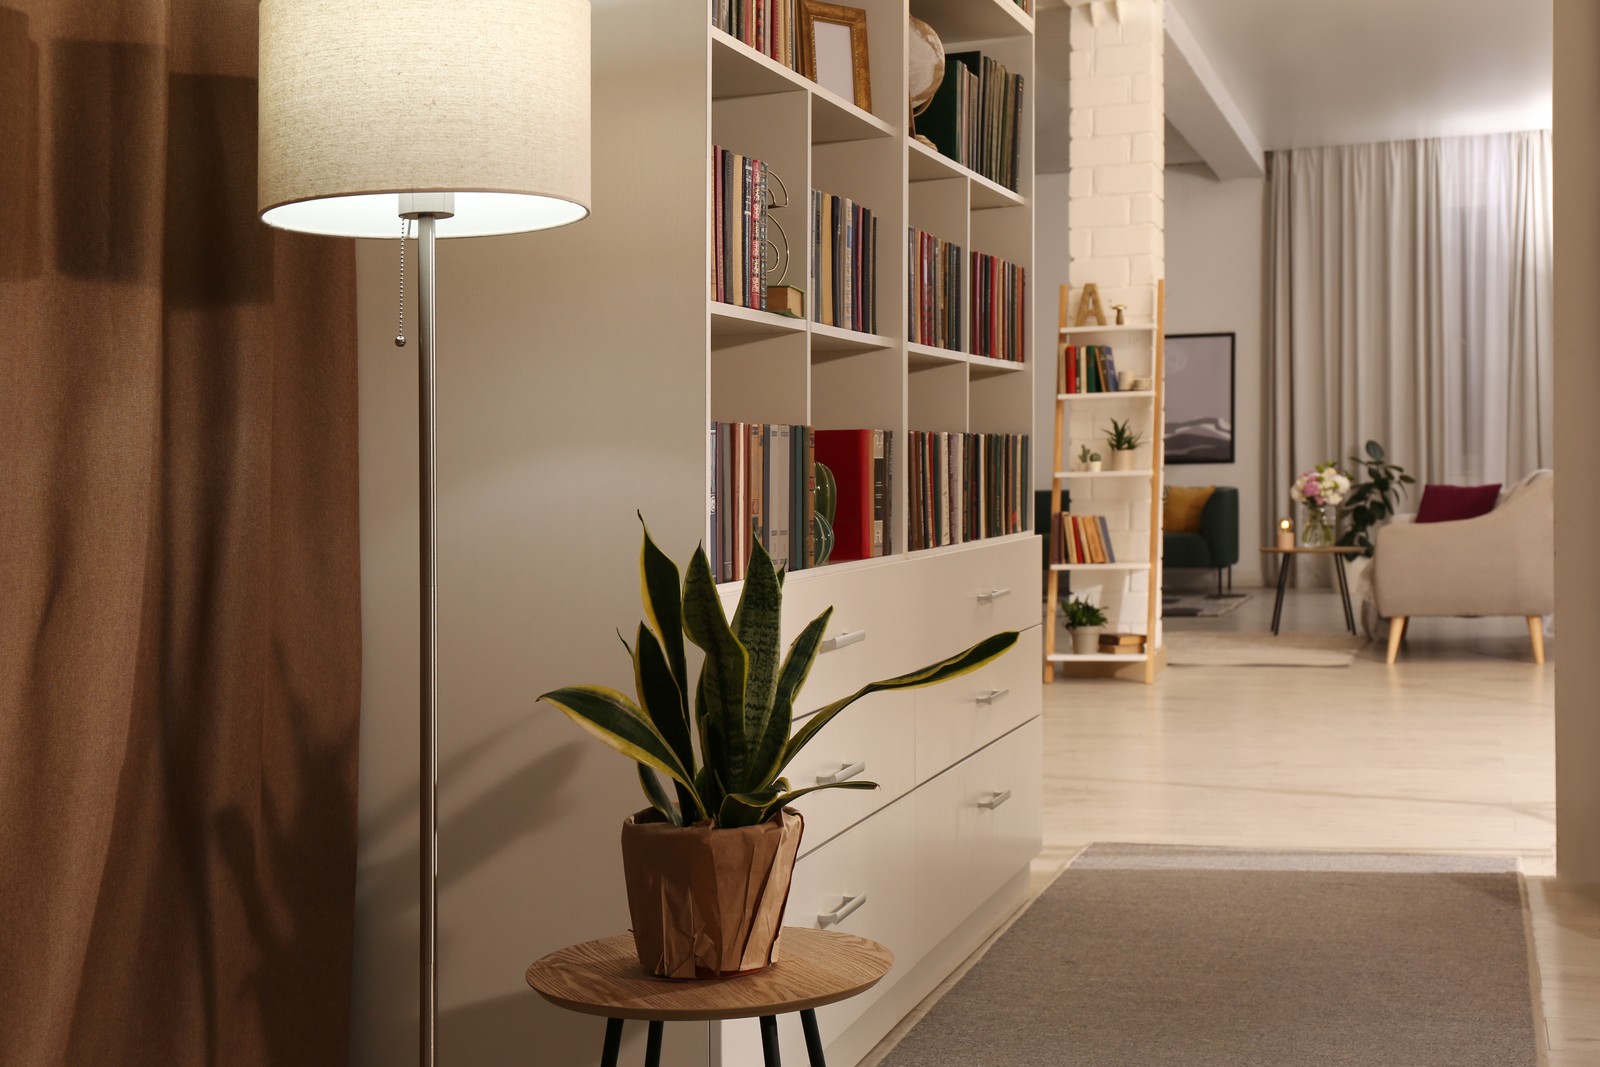 Photo of home library interior with collection of different books on shelves